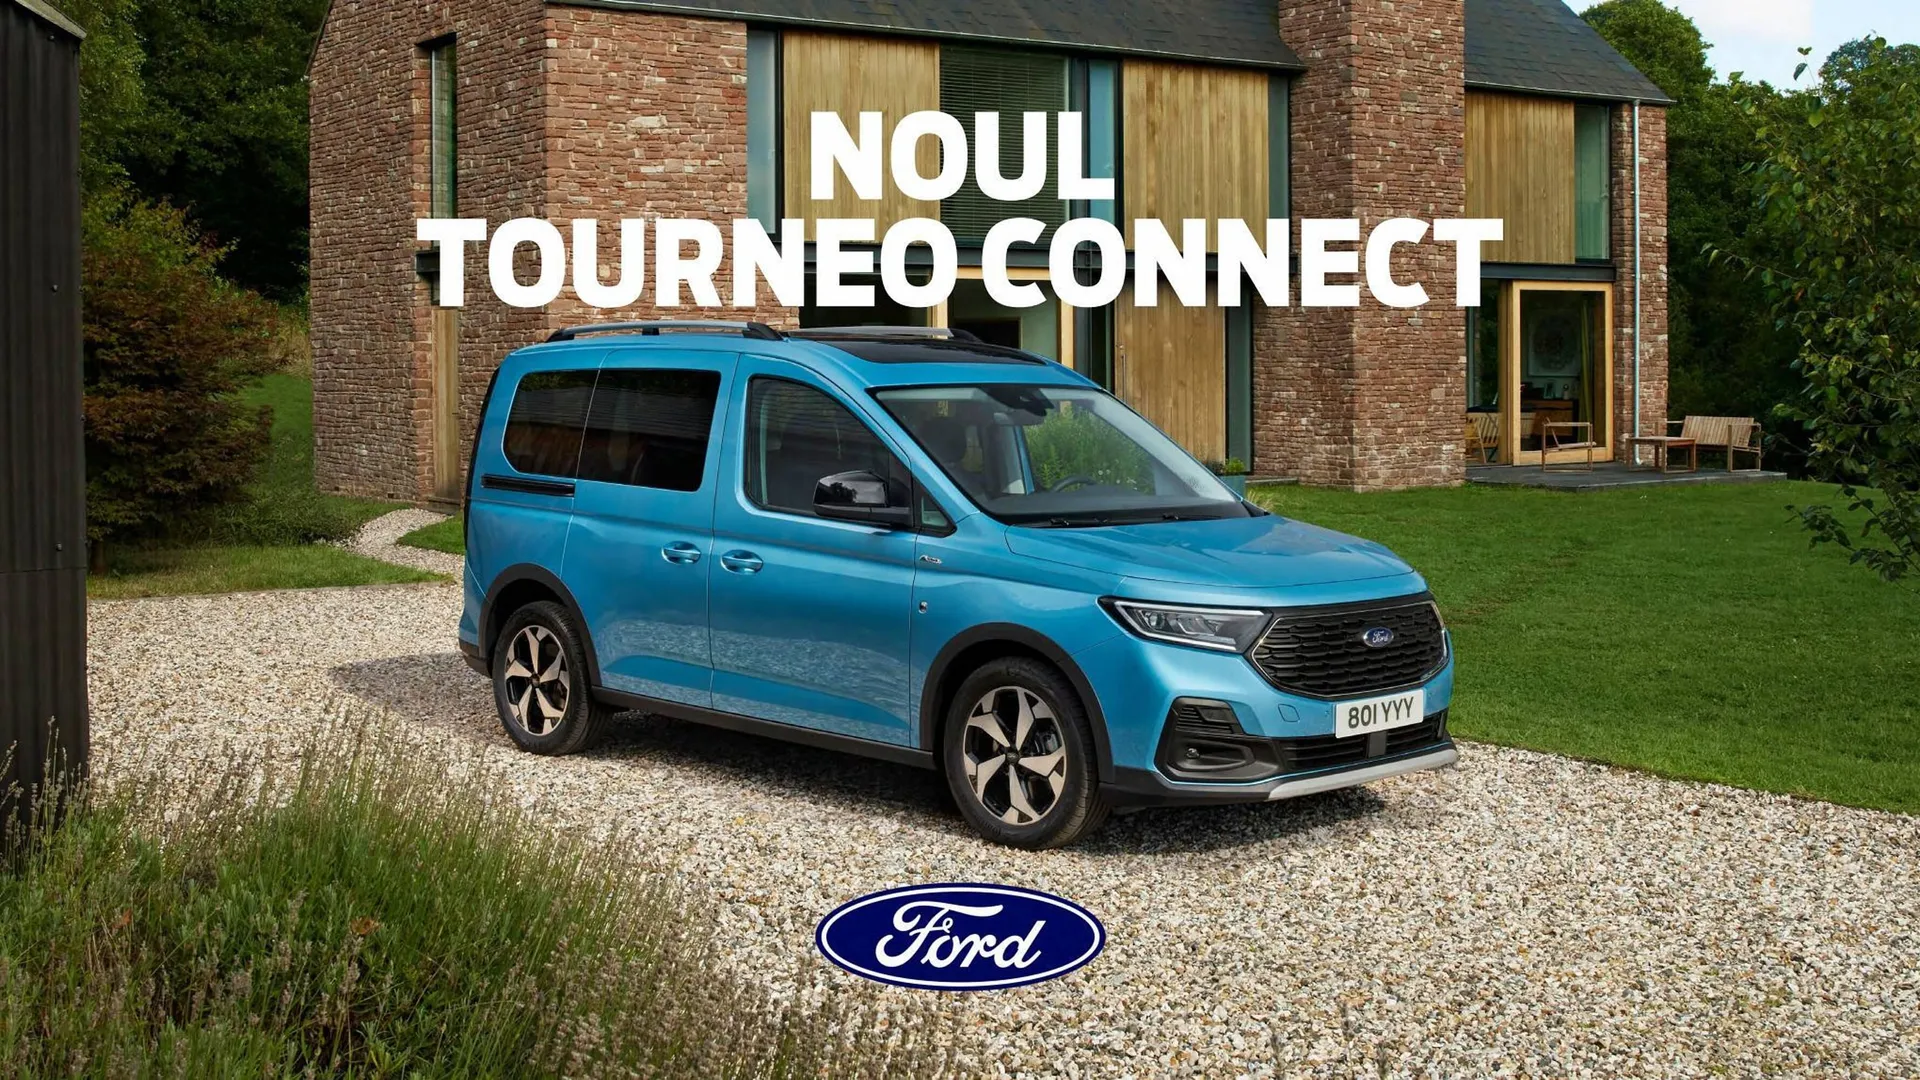 Ford Noul Tourneo Connect catalog - 1